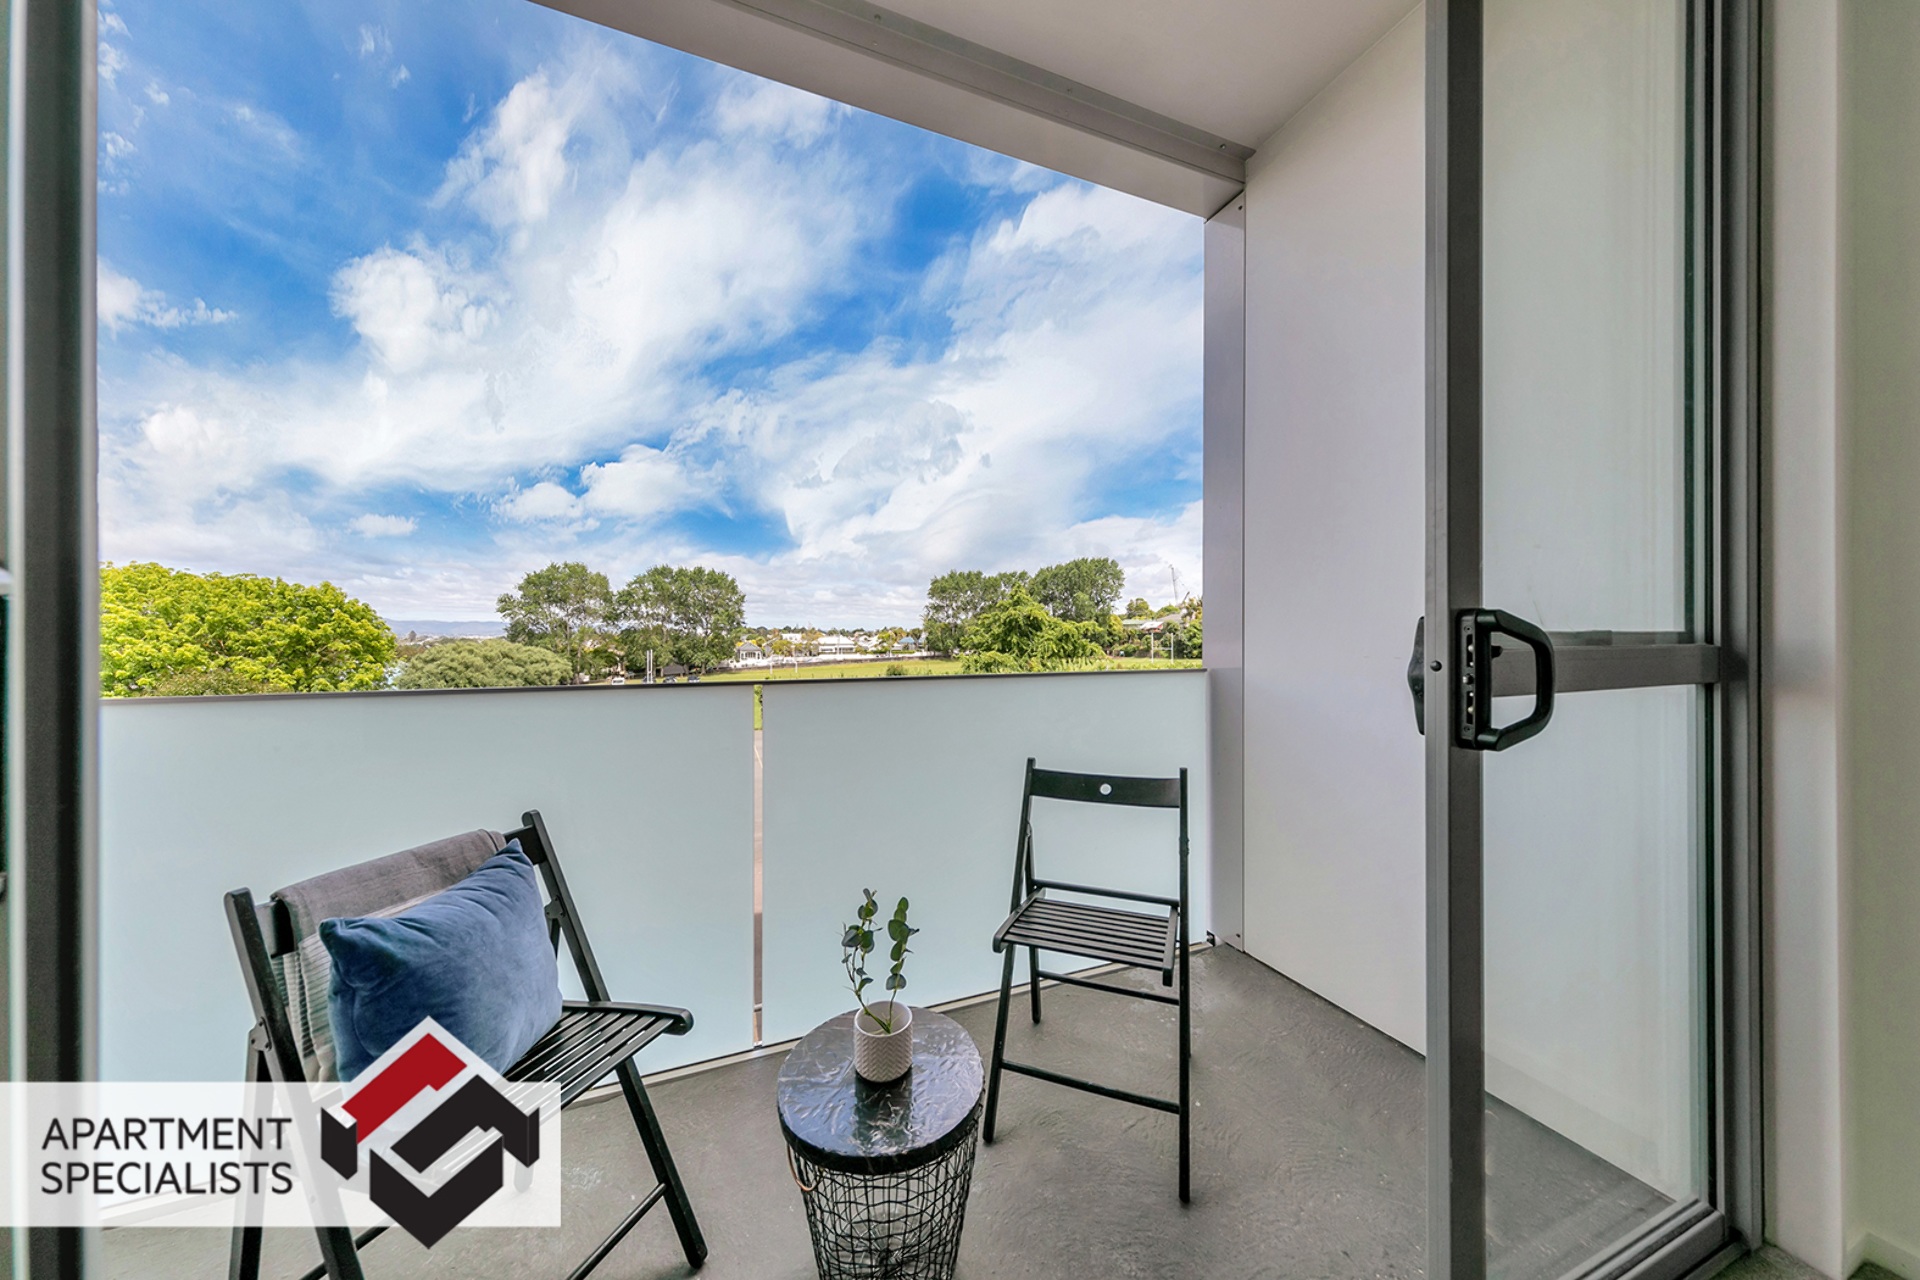 0 | 17 Blake Street, Ponsonby | Apartment Specialists